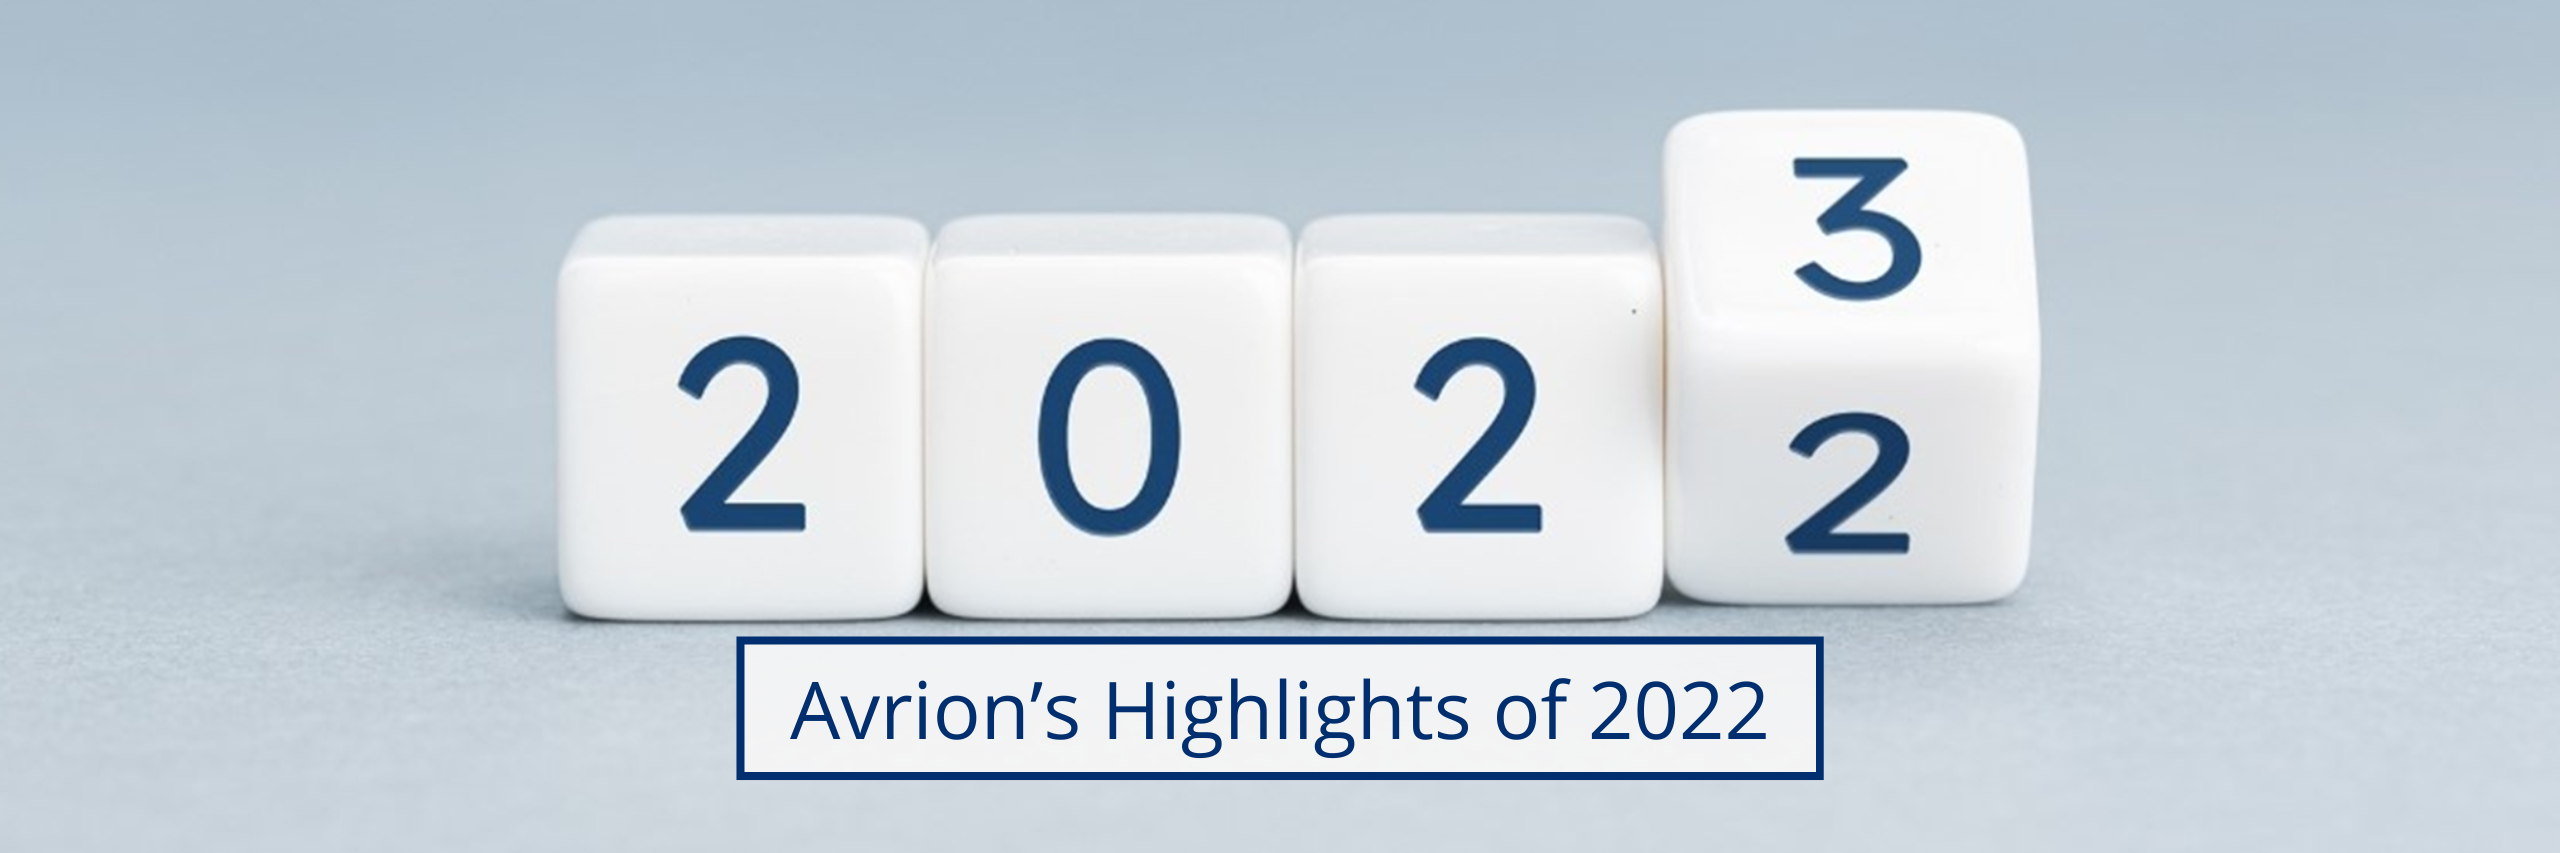 Avrion’s Highlights of 2022